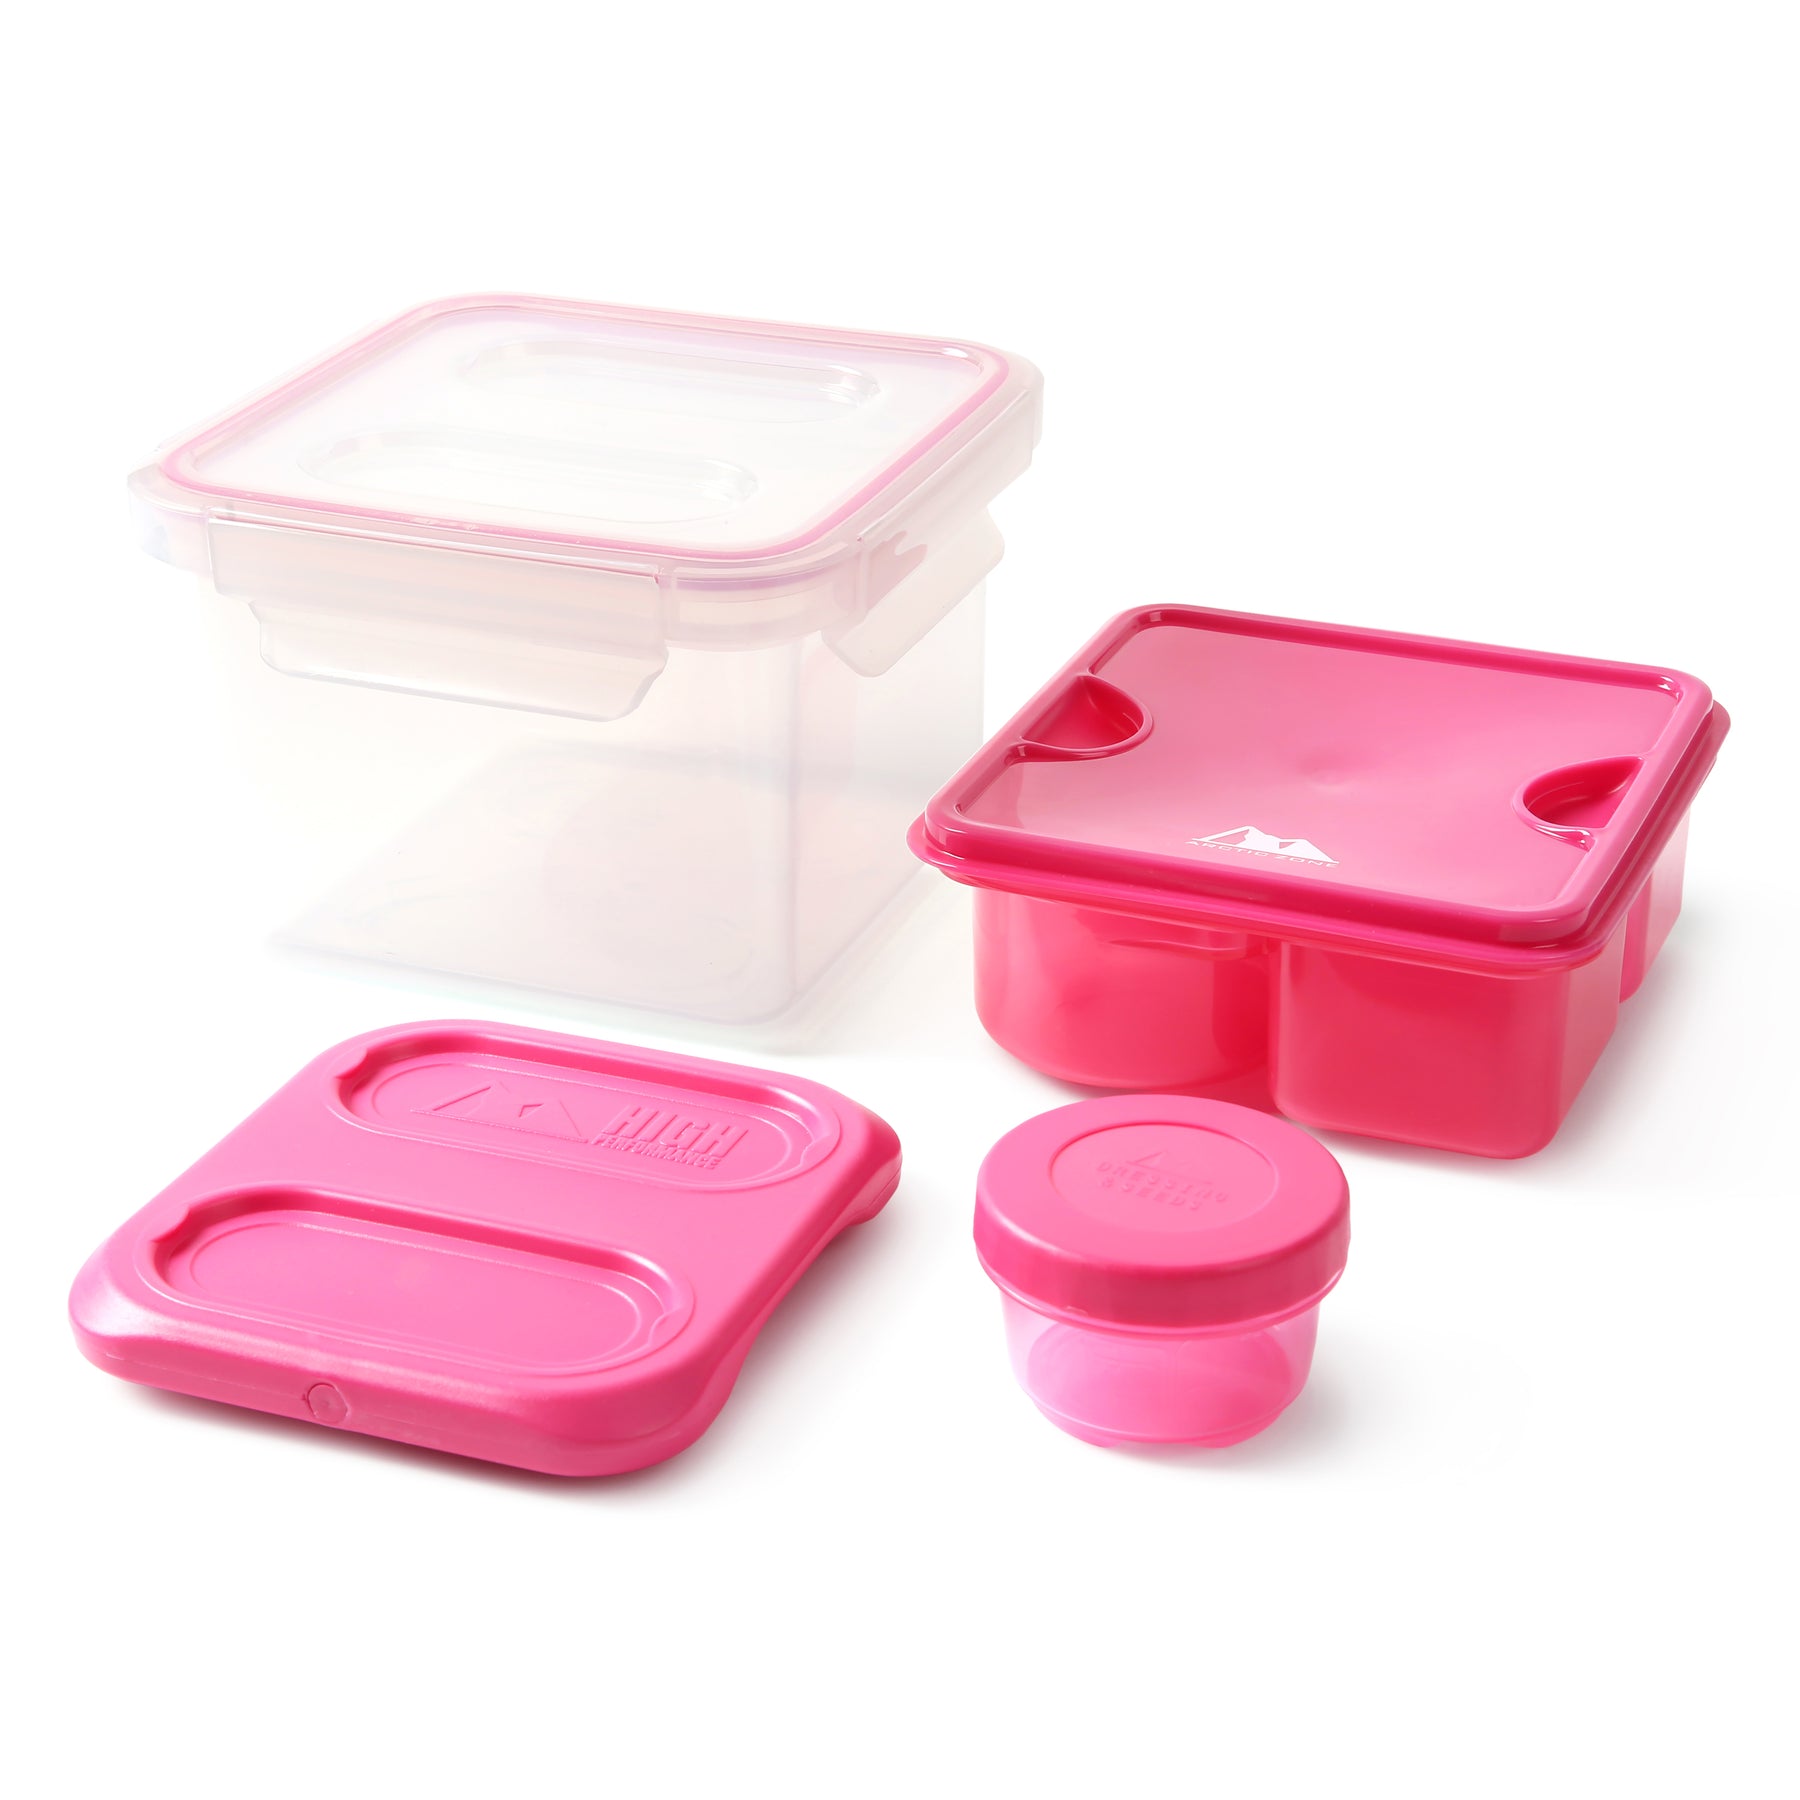 7 Piece All-in-One Deep Dish Meal Set Pink by Arctic Zone